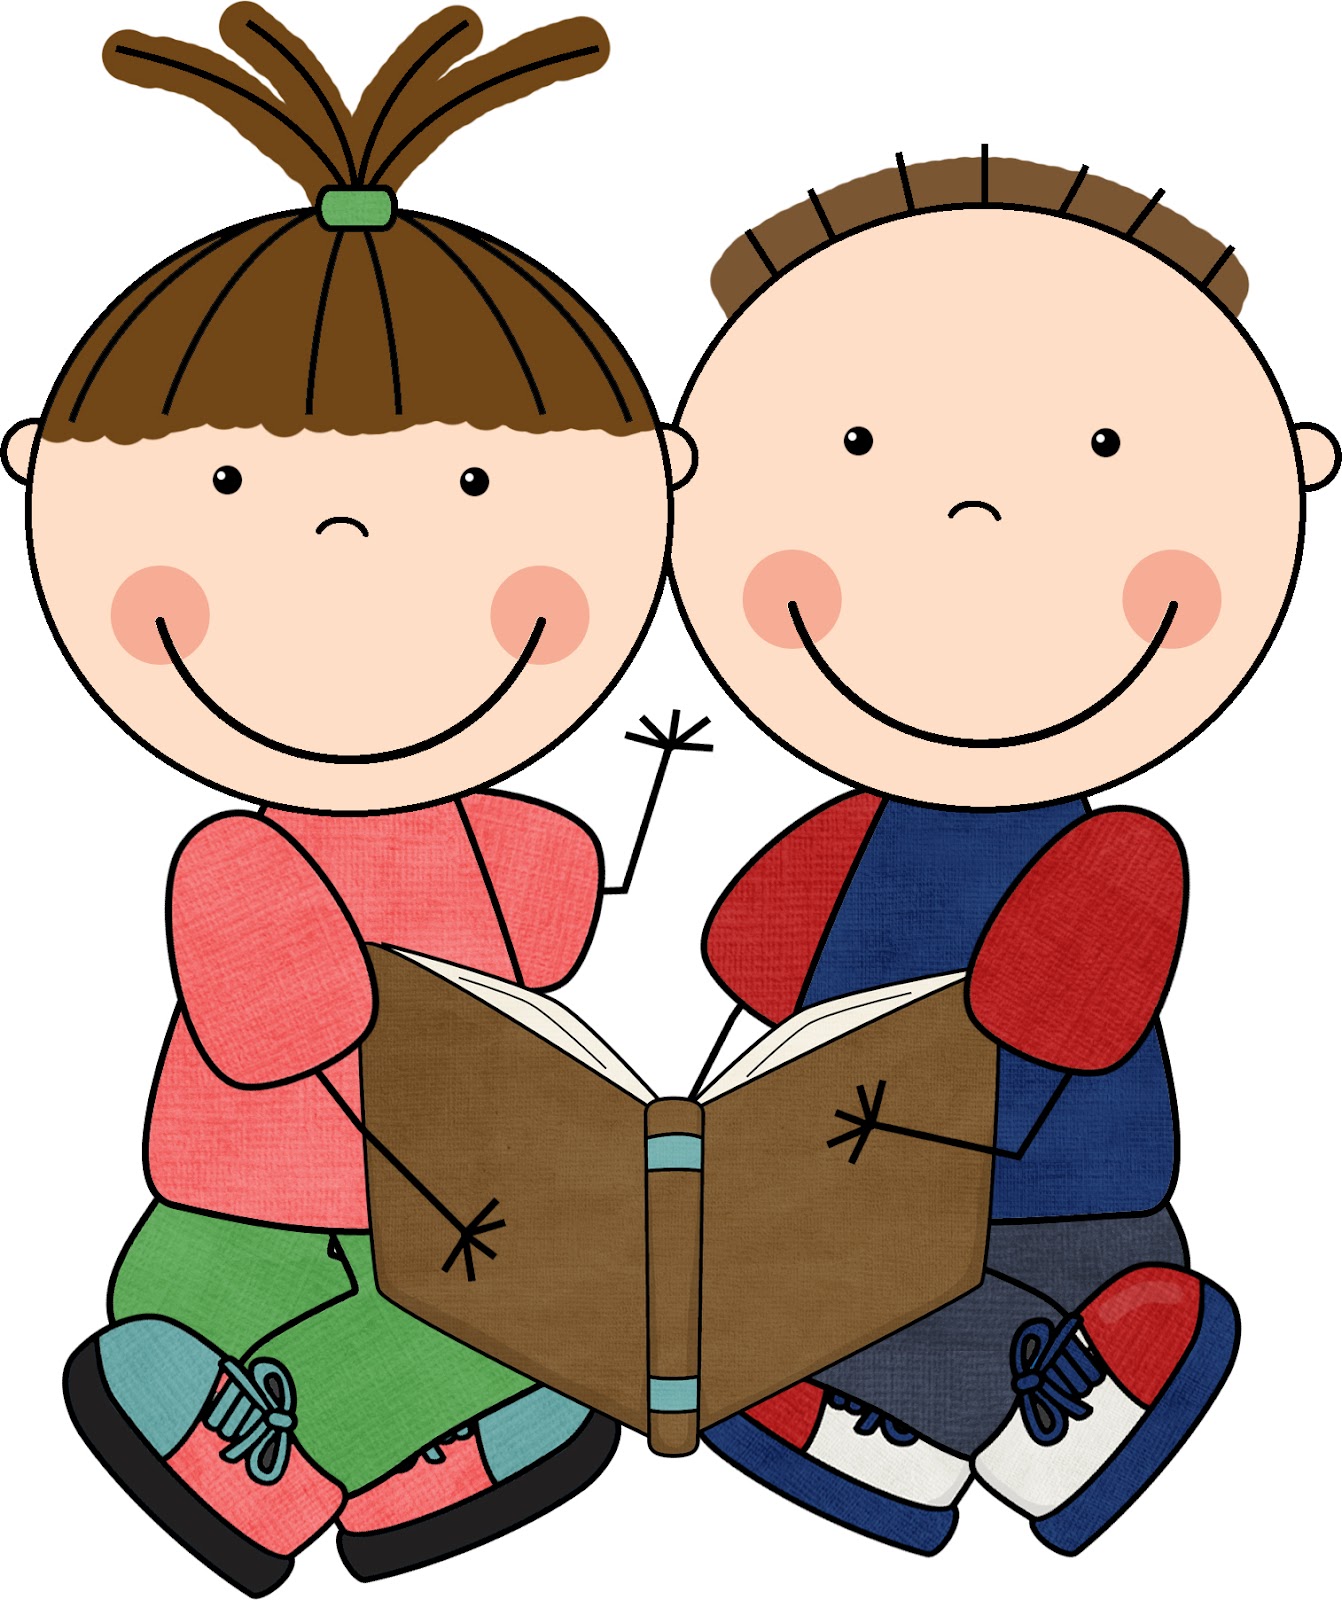 Child Reading A Book Clipart - ClipArt Best